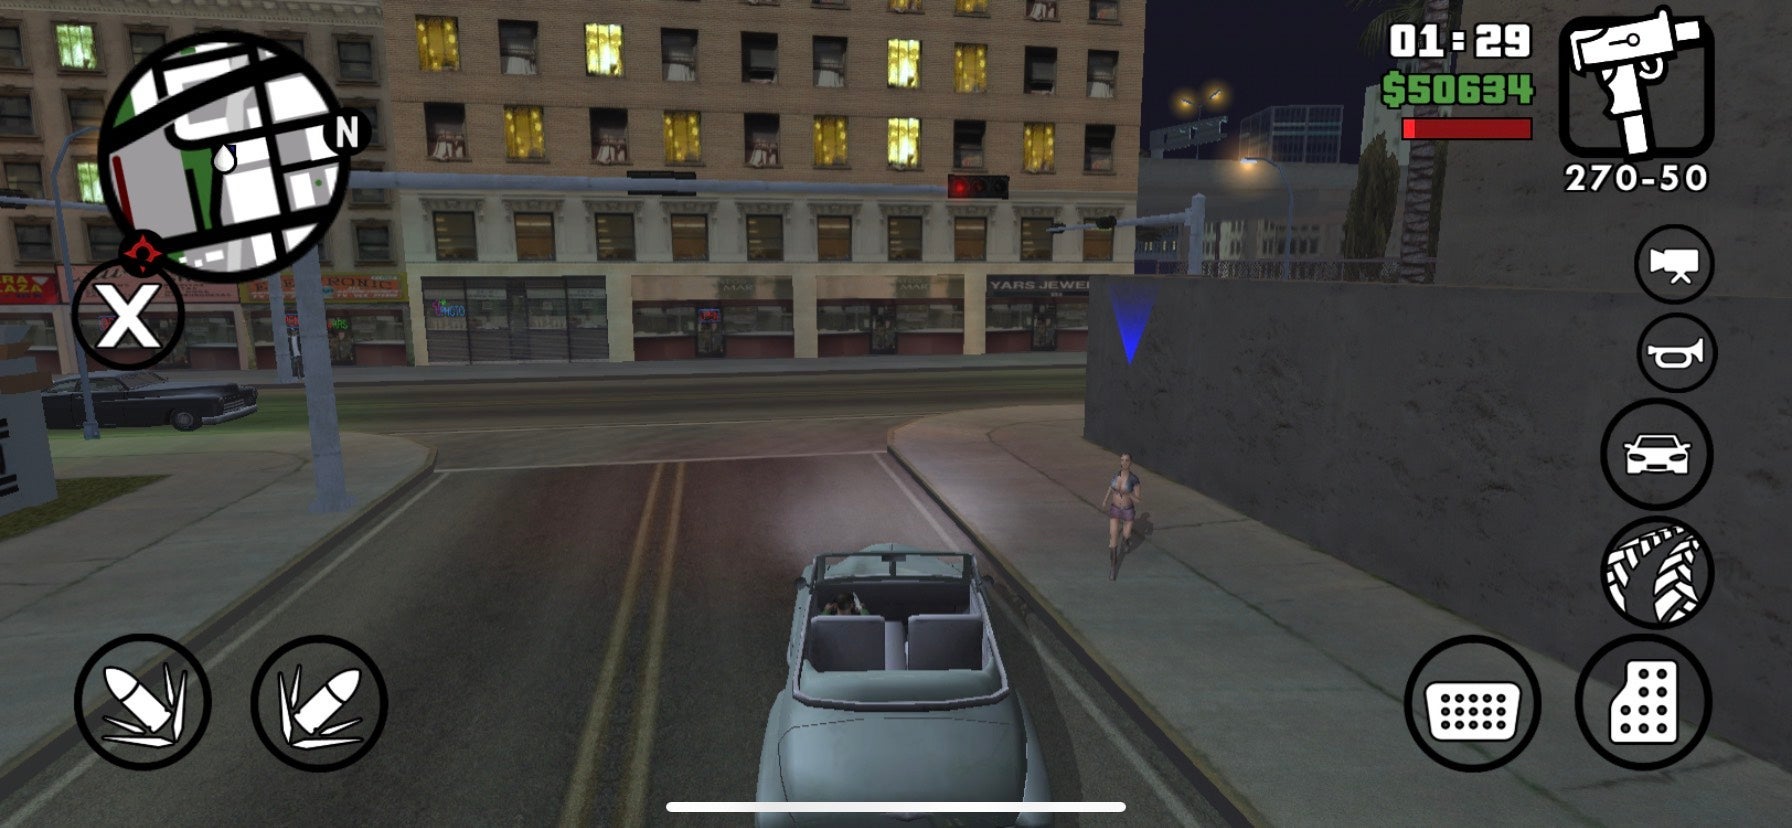 anita bartha recommends how to get a hooker in gta 4 pic